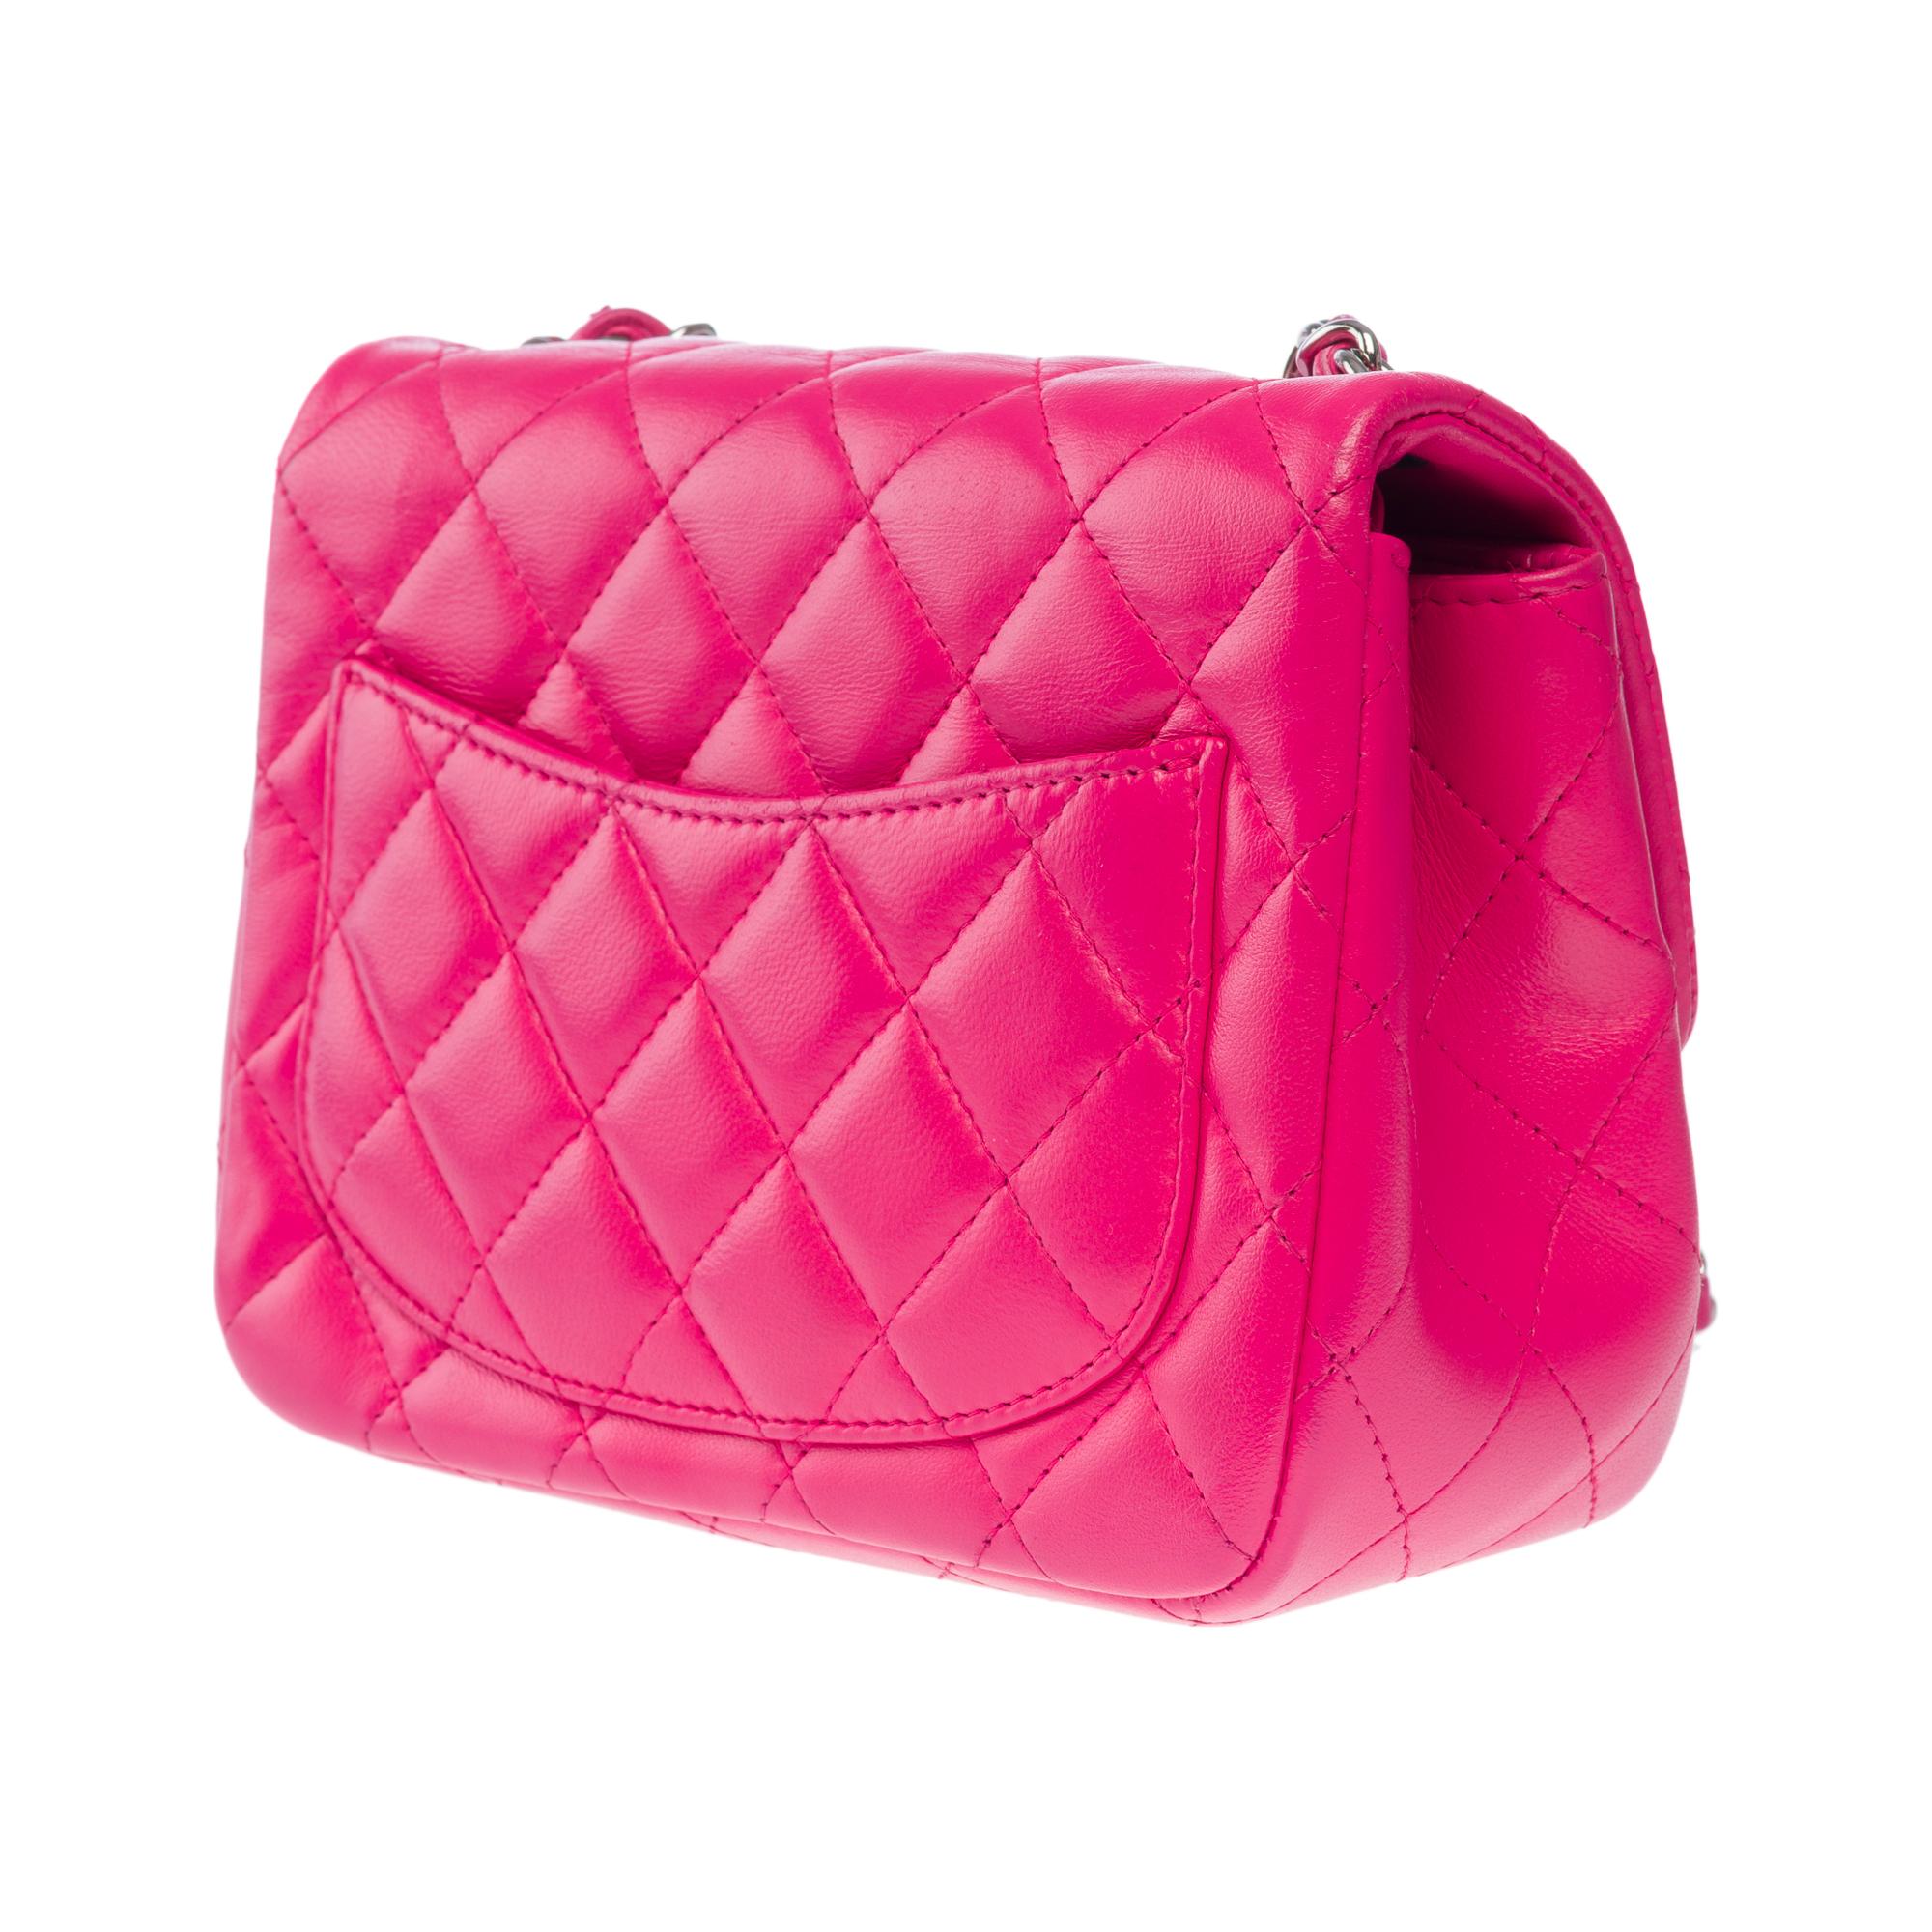 Gorgeous Chanel Mini Timeless Shoulder flap bag in Pink quilted leather, SHW For Sale 1